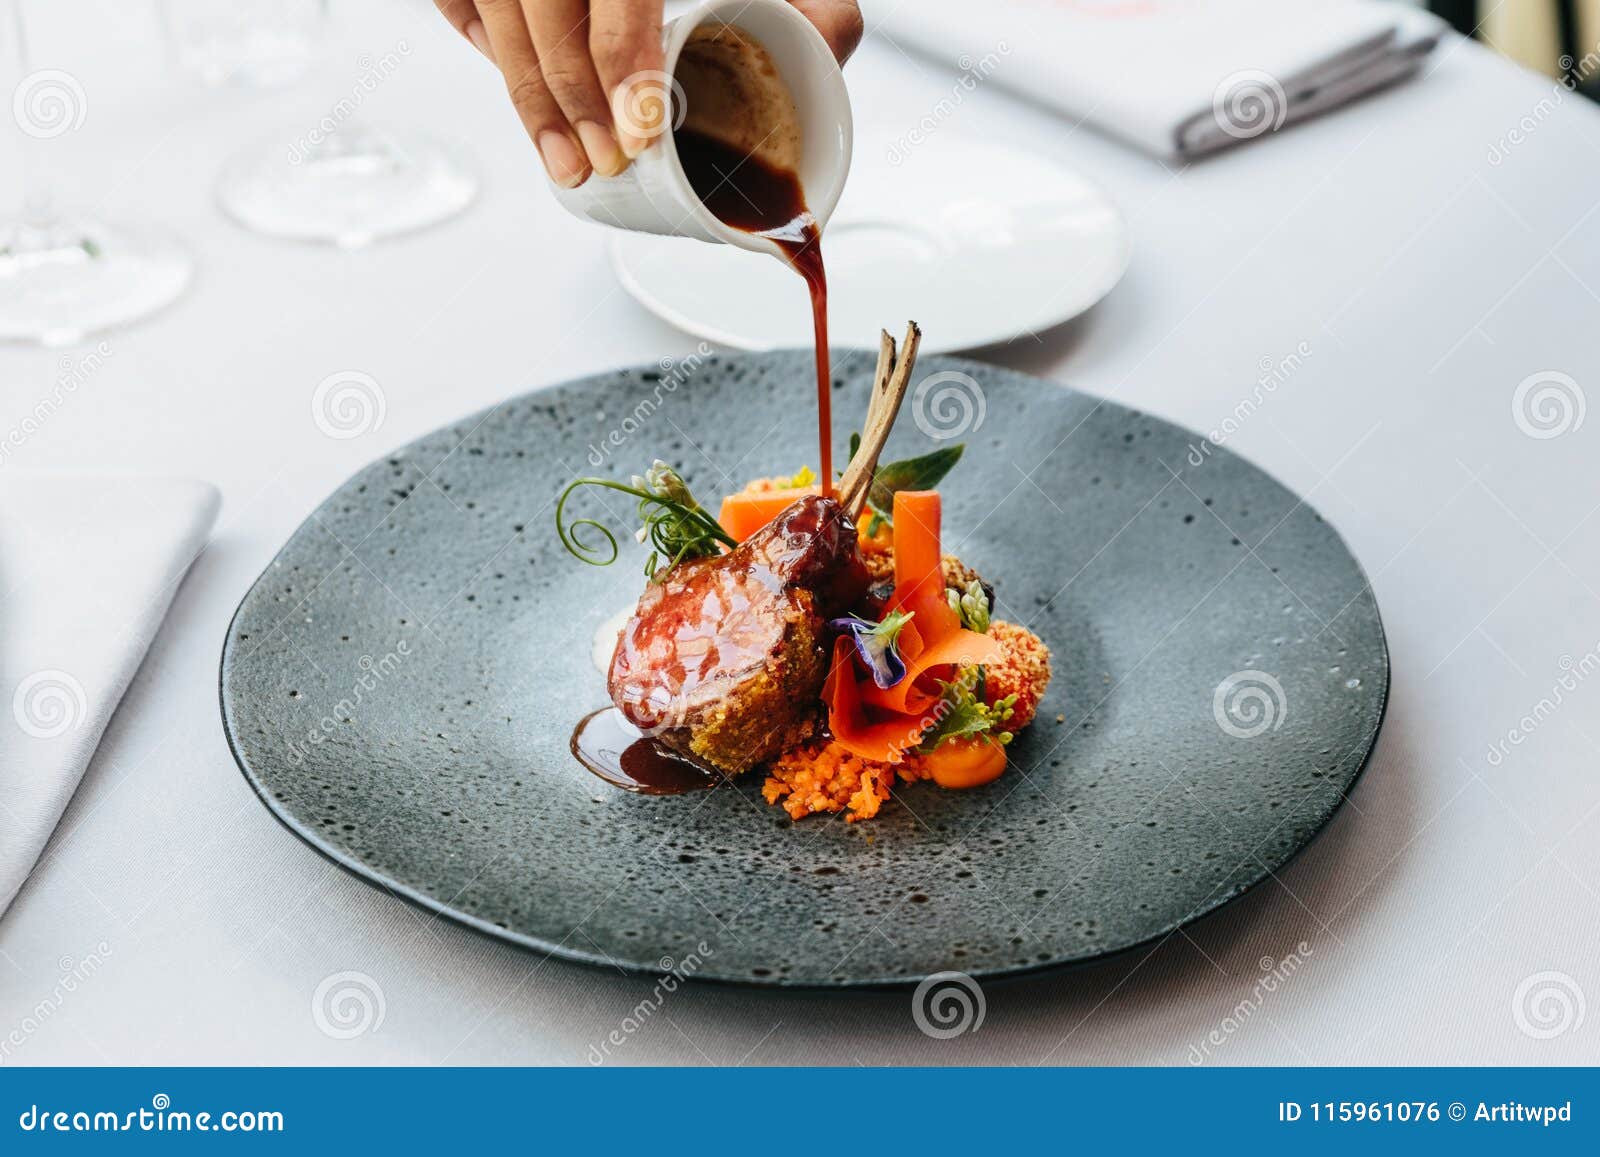 modern french cuisine: roasted lamb neck & rack served with carrot, yellow curry and lamb sauce. served in black stone plate.